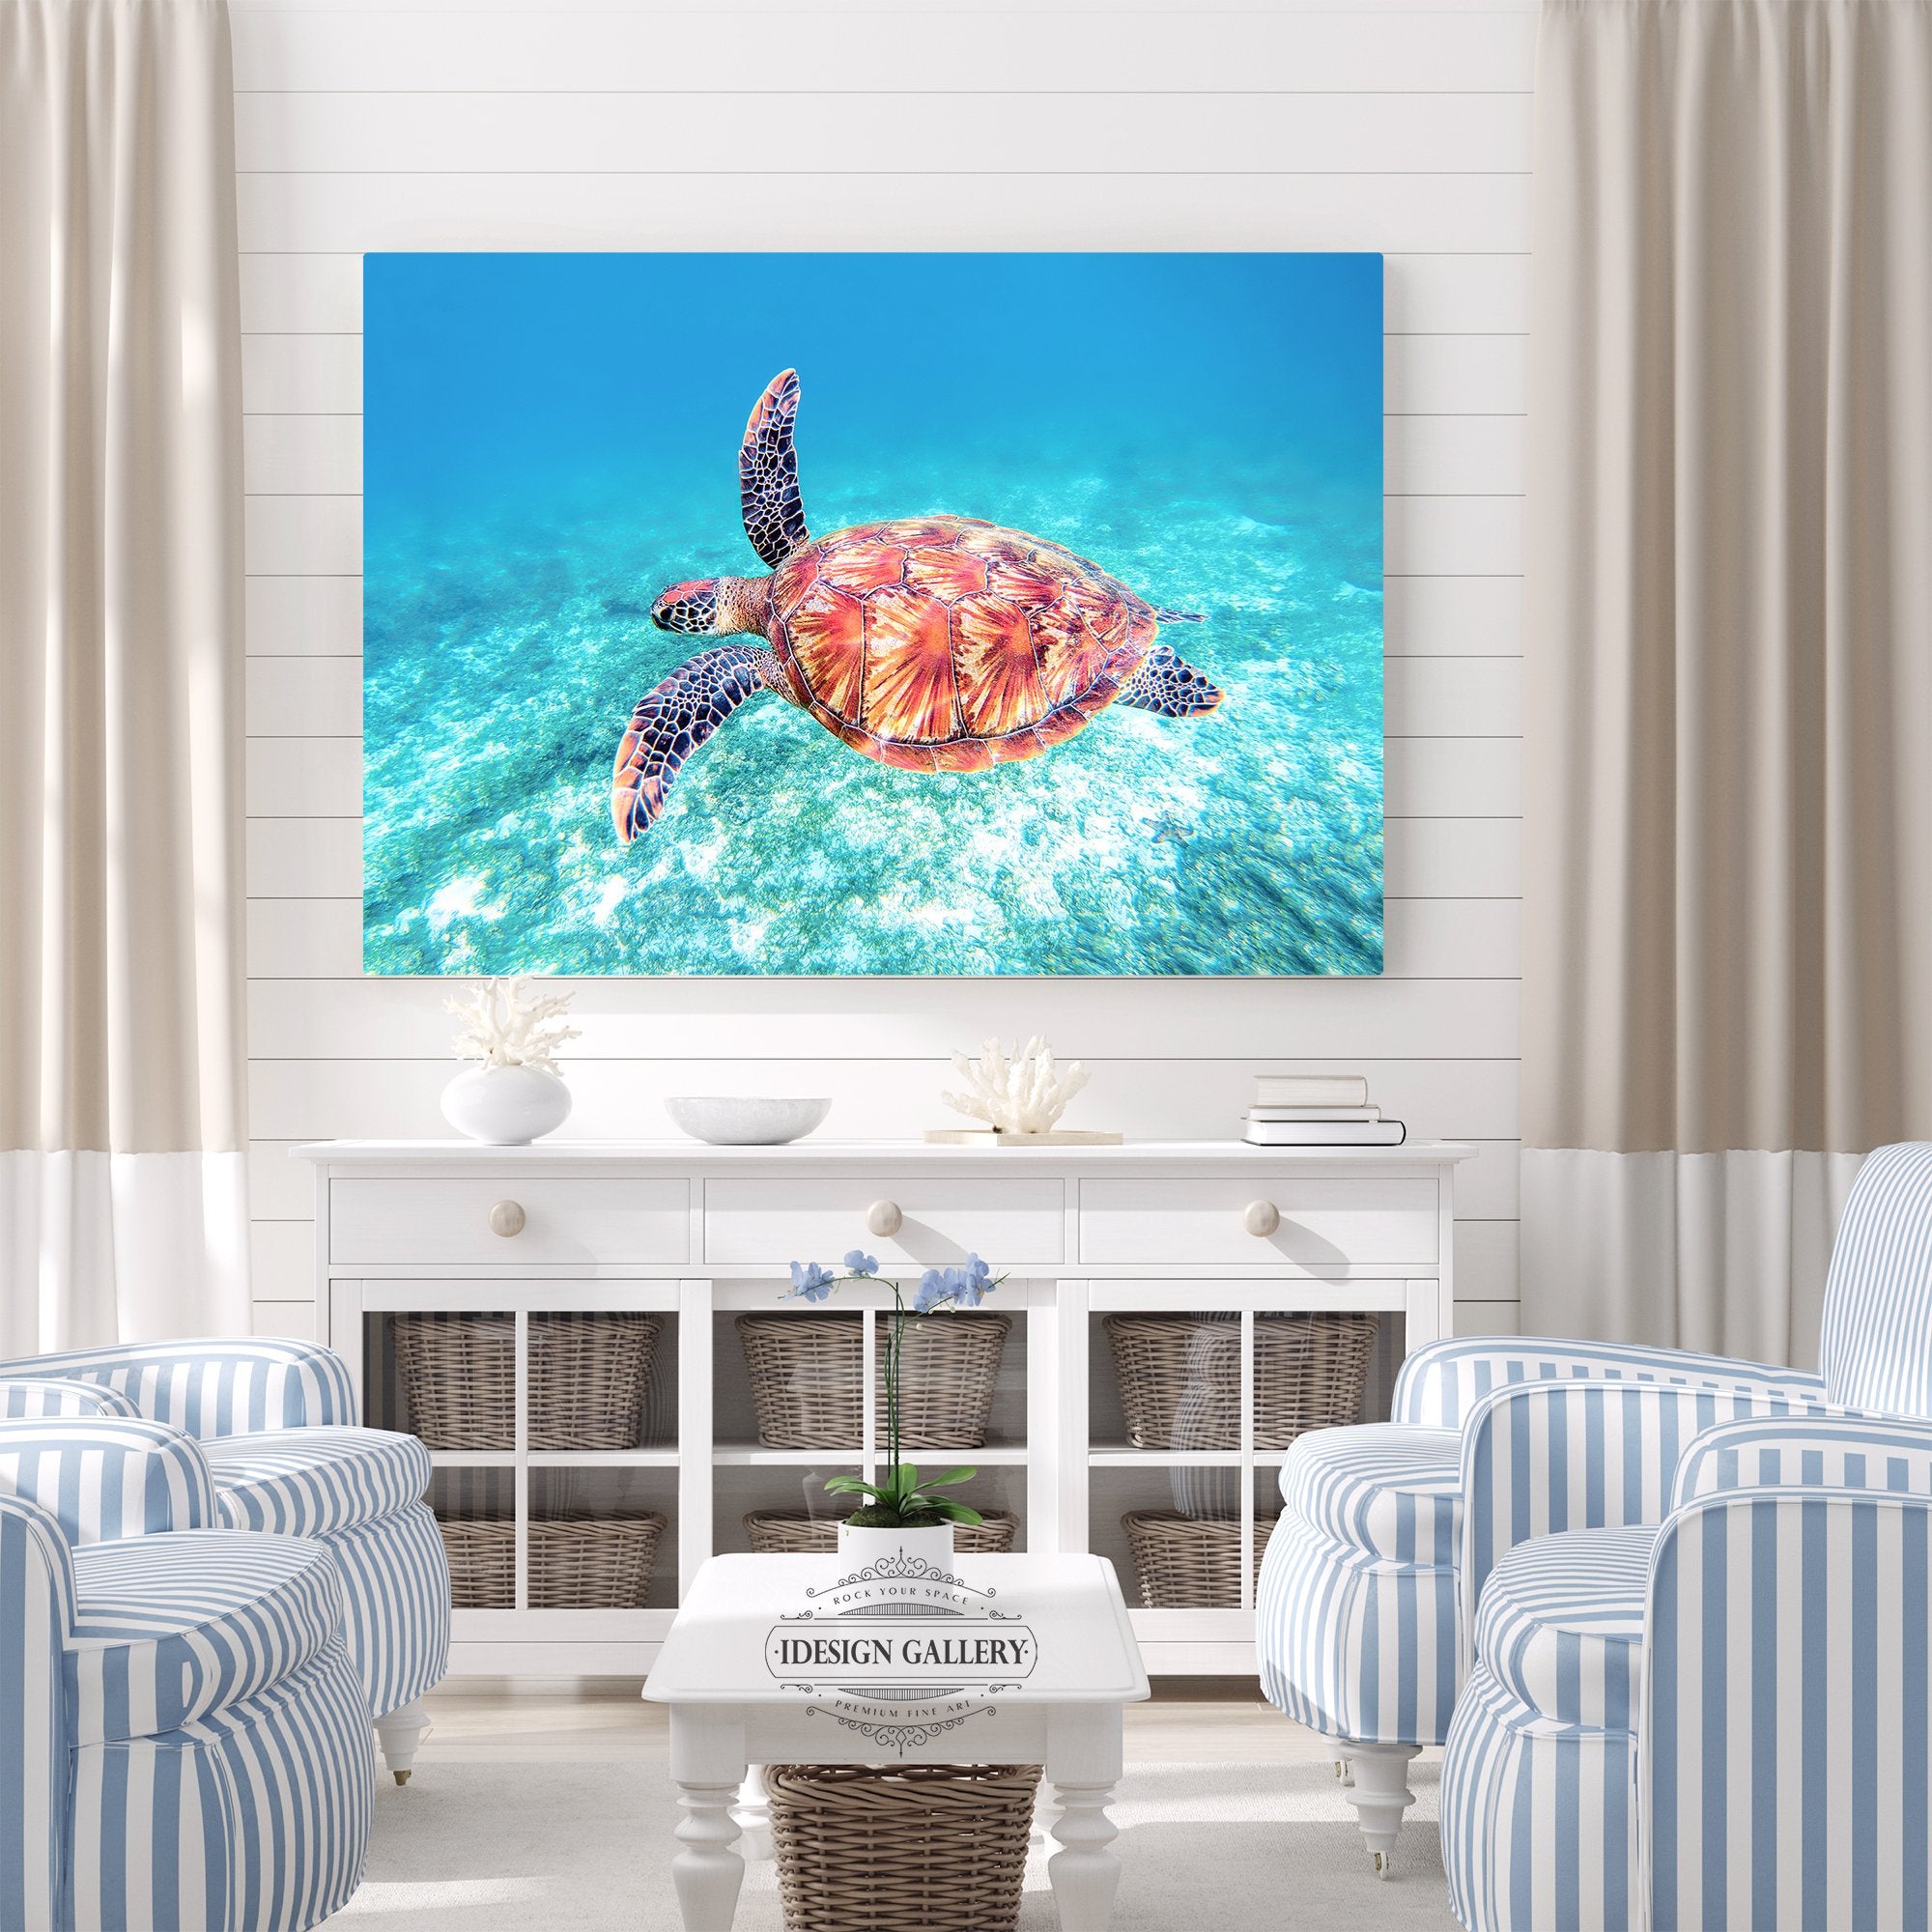 Sea Turtle Fly-By – iDesign Gallery